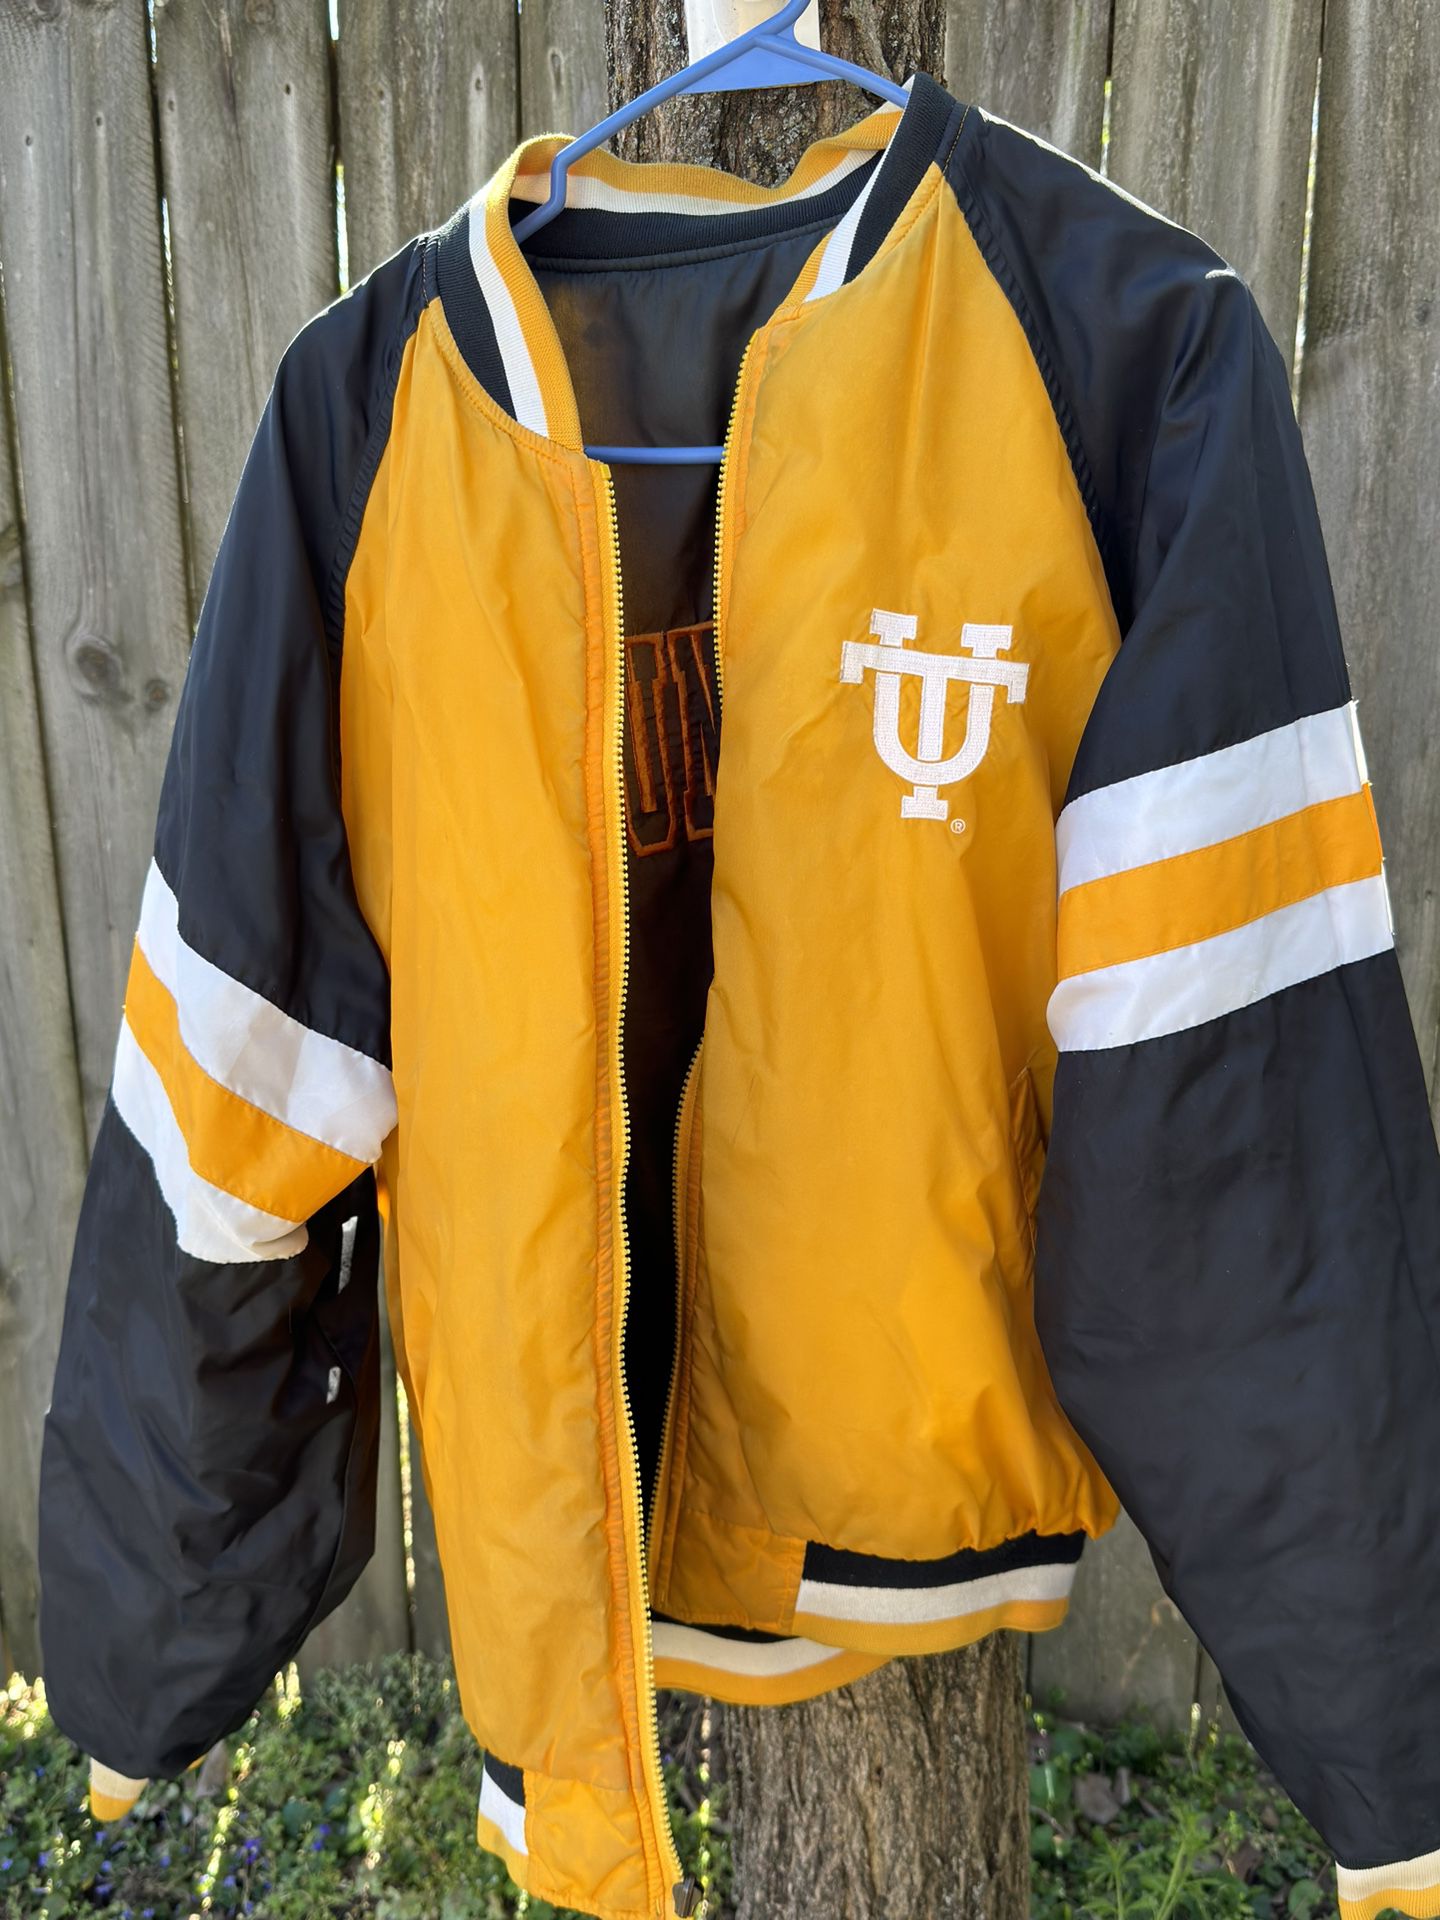 Vintage TENNESSEE VOLS 2 sided jacket size XL